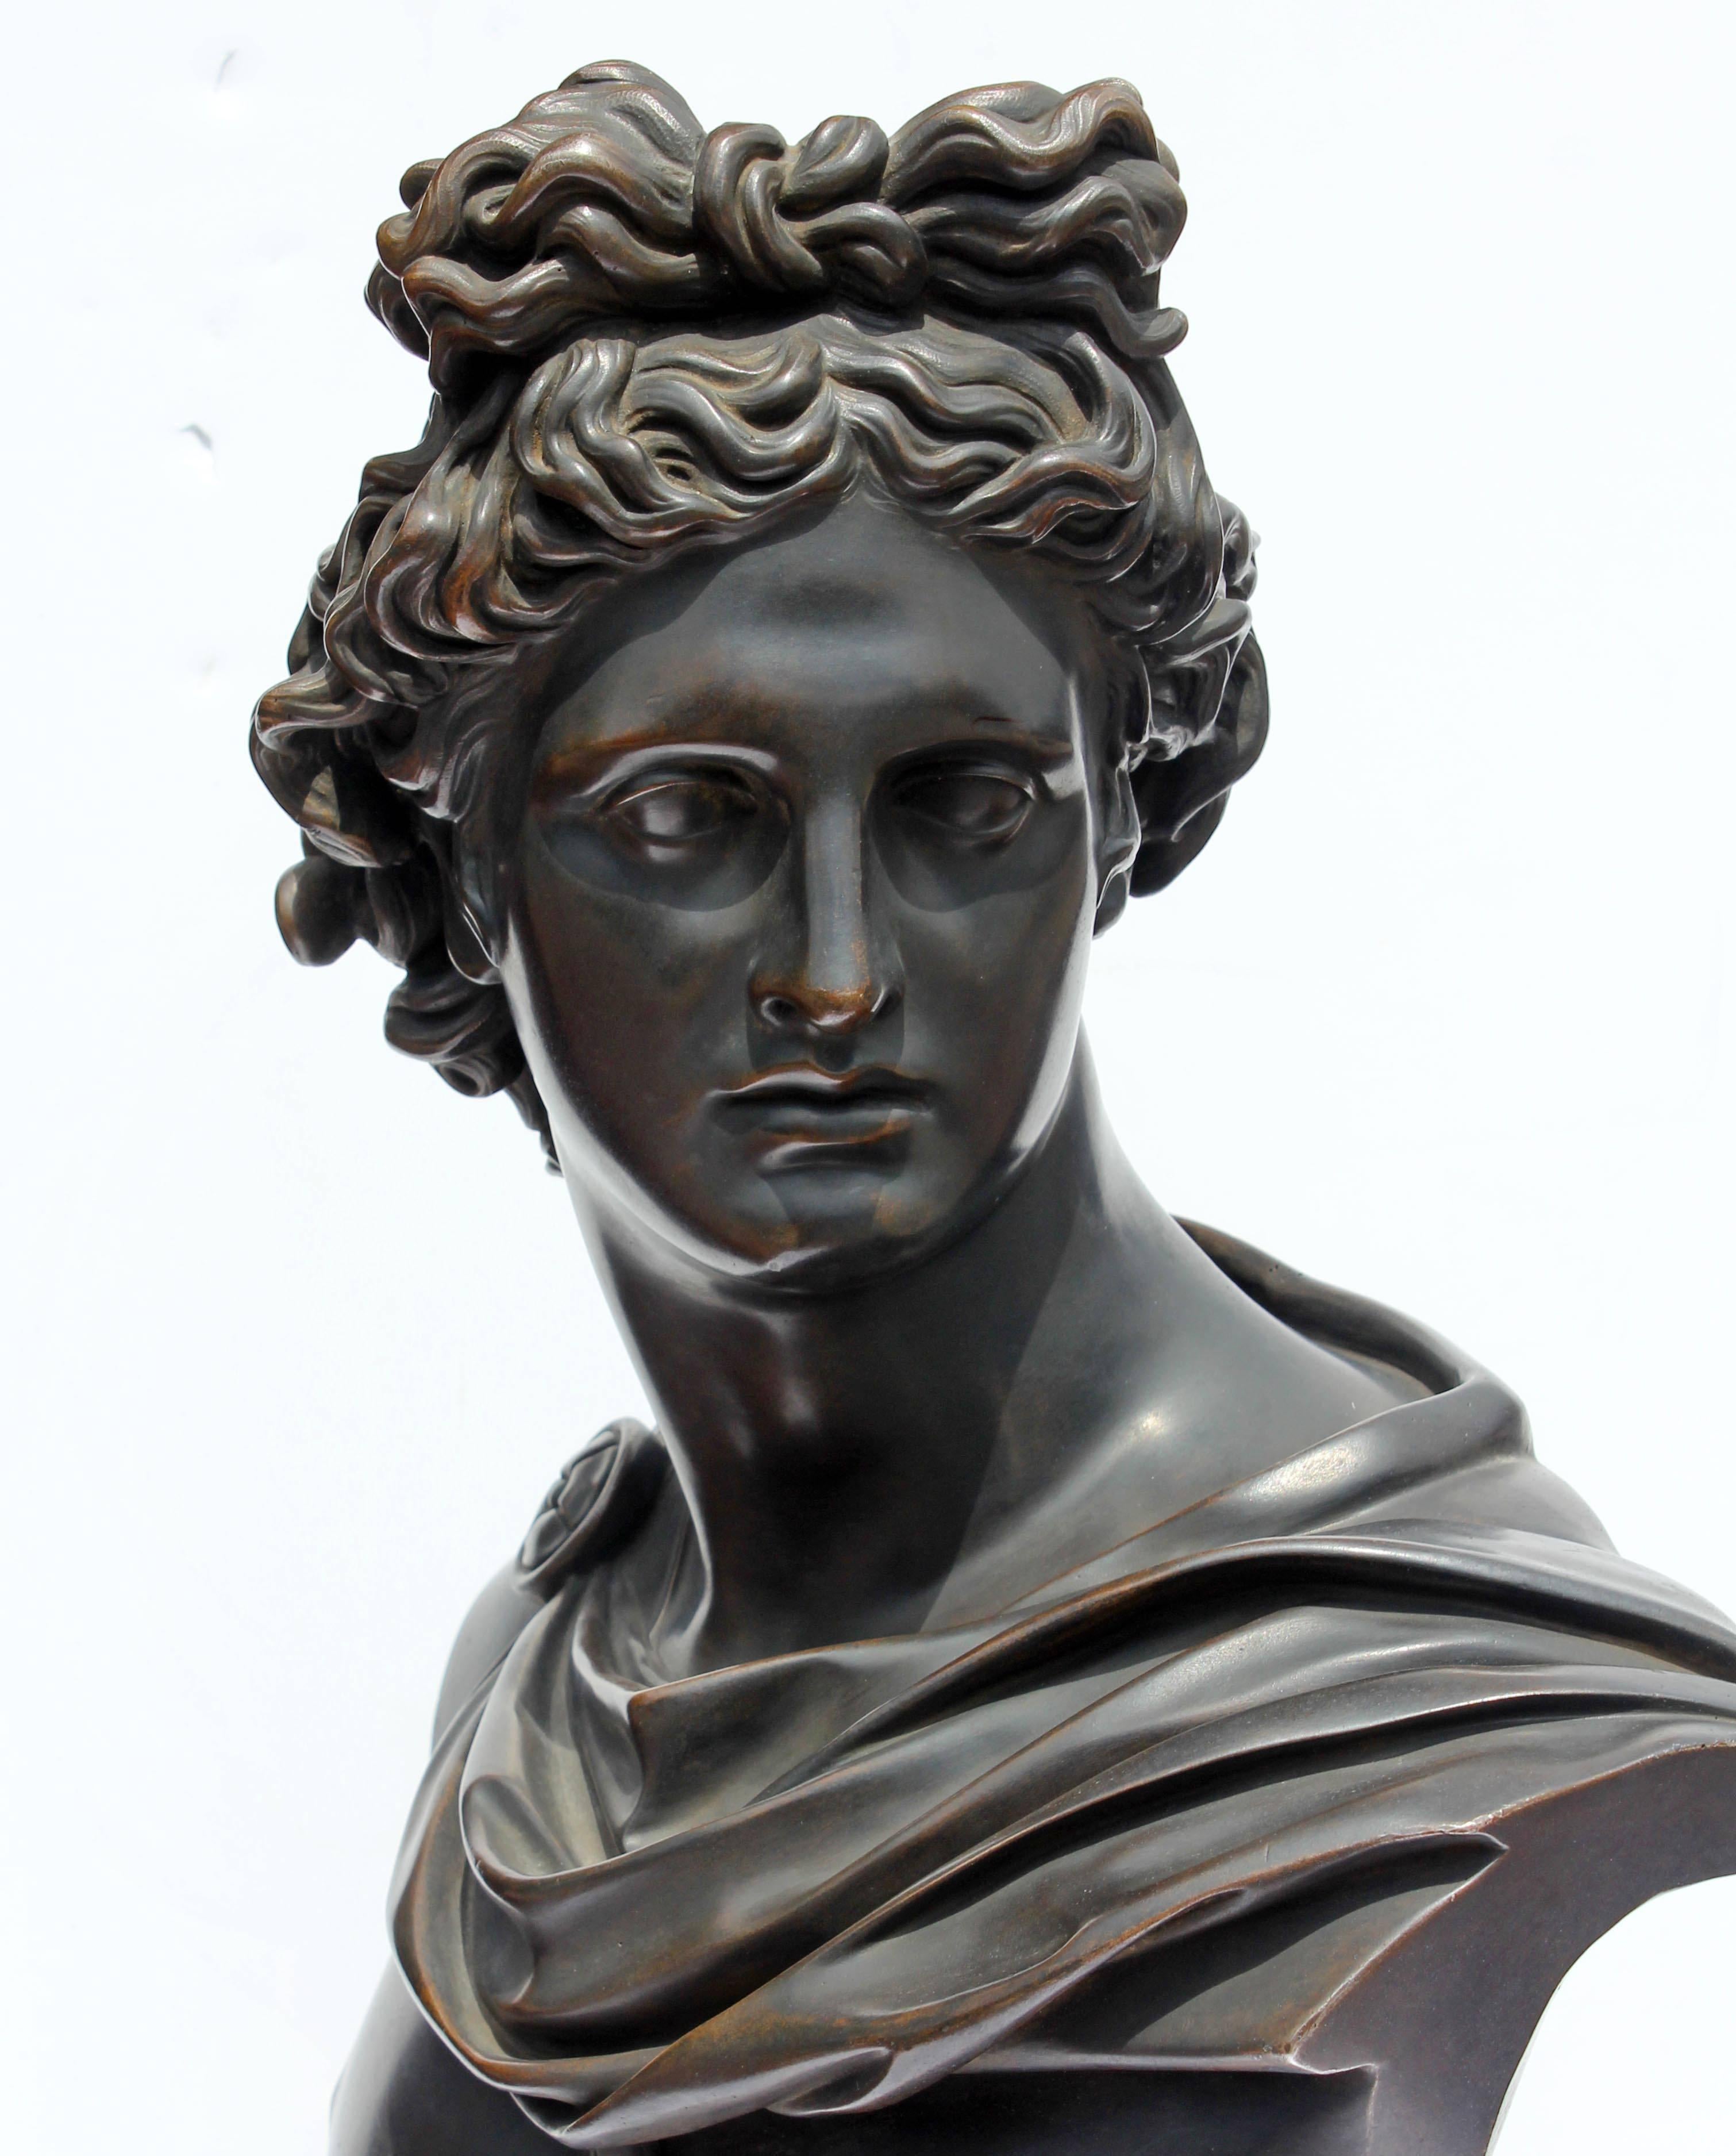 Large 19th century grand tour bronze sculpture, bust of Greek god Apollo. Patinated bronze on polished bronze base.